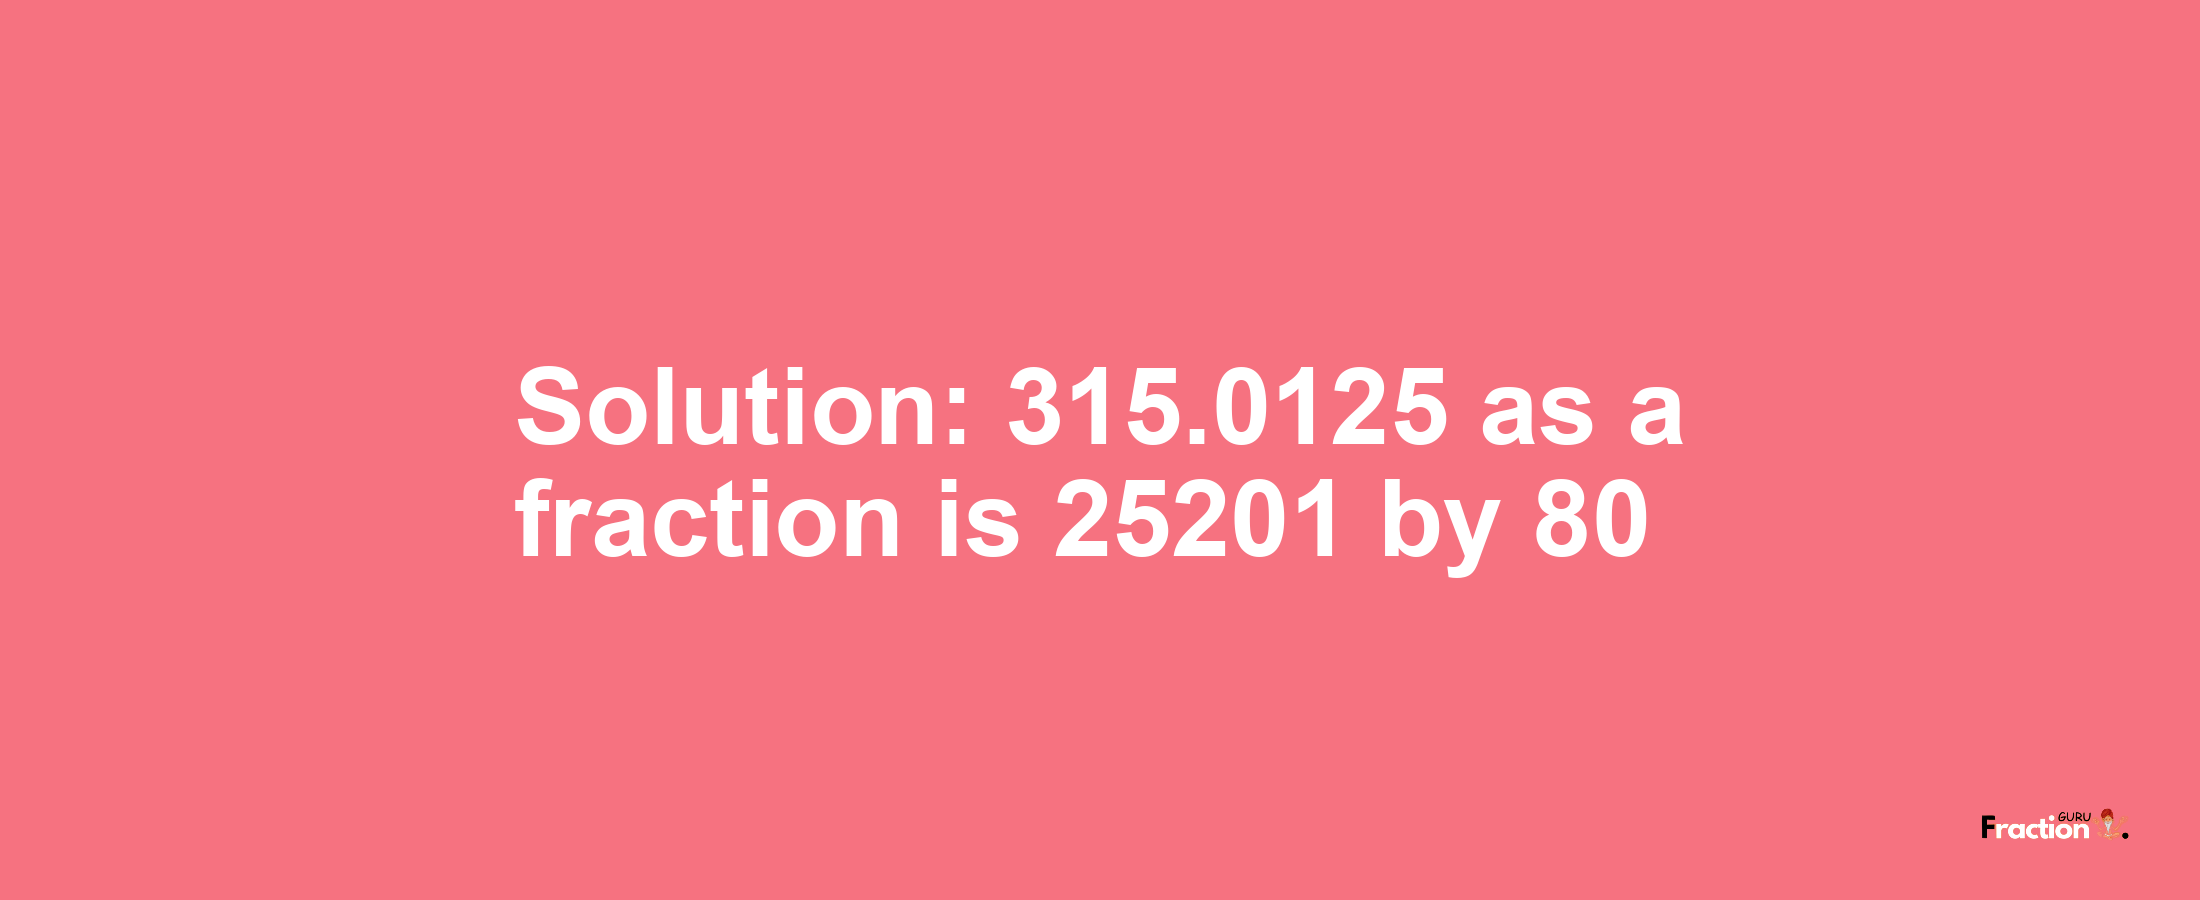 Solution:315.0125 as a fraction is 25201/80